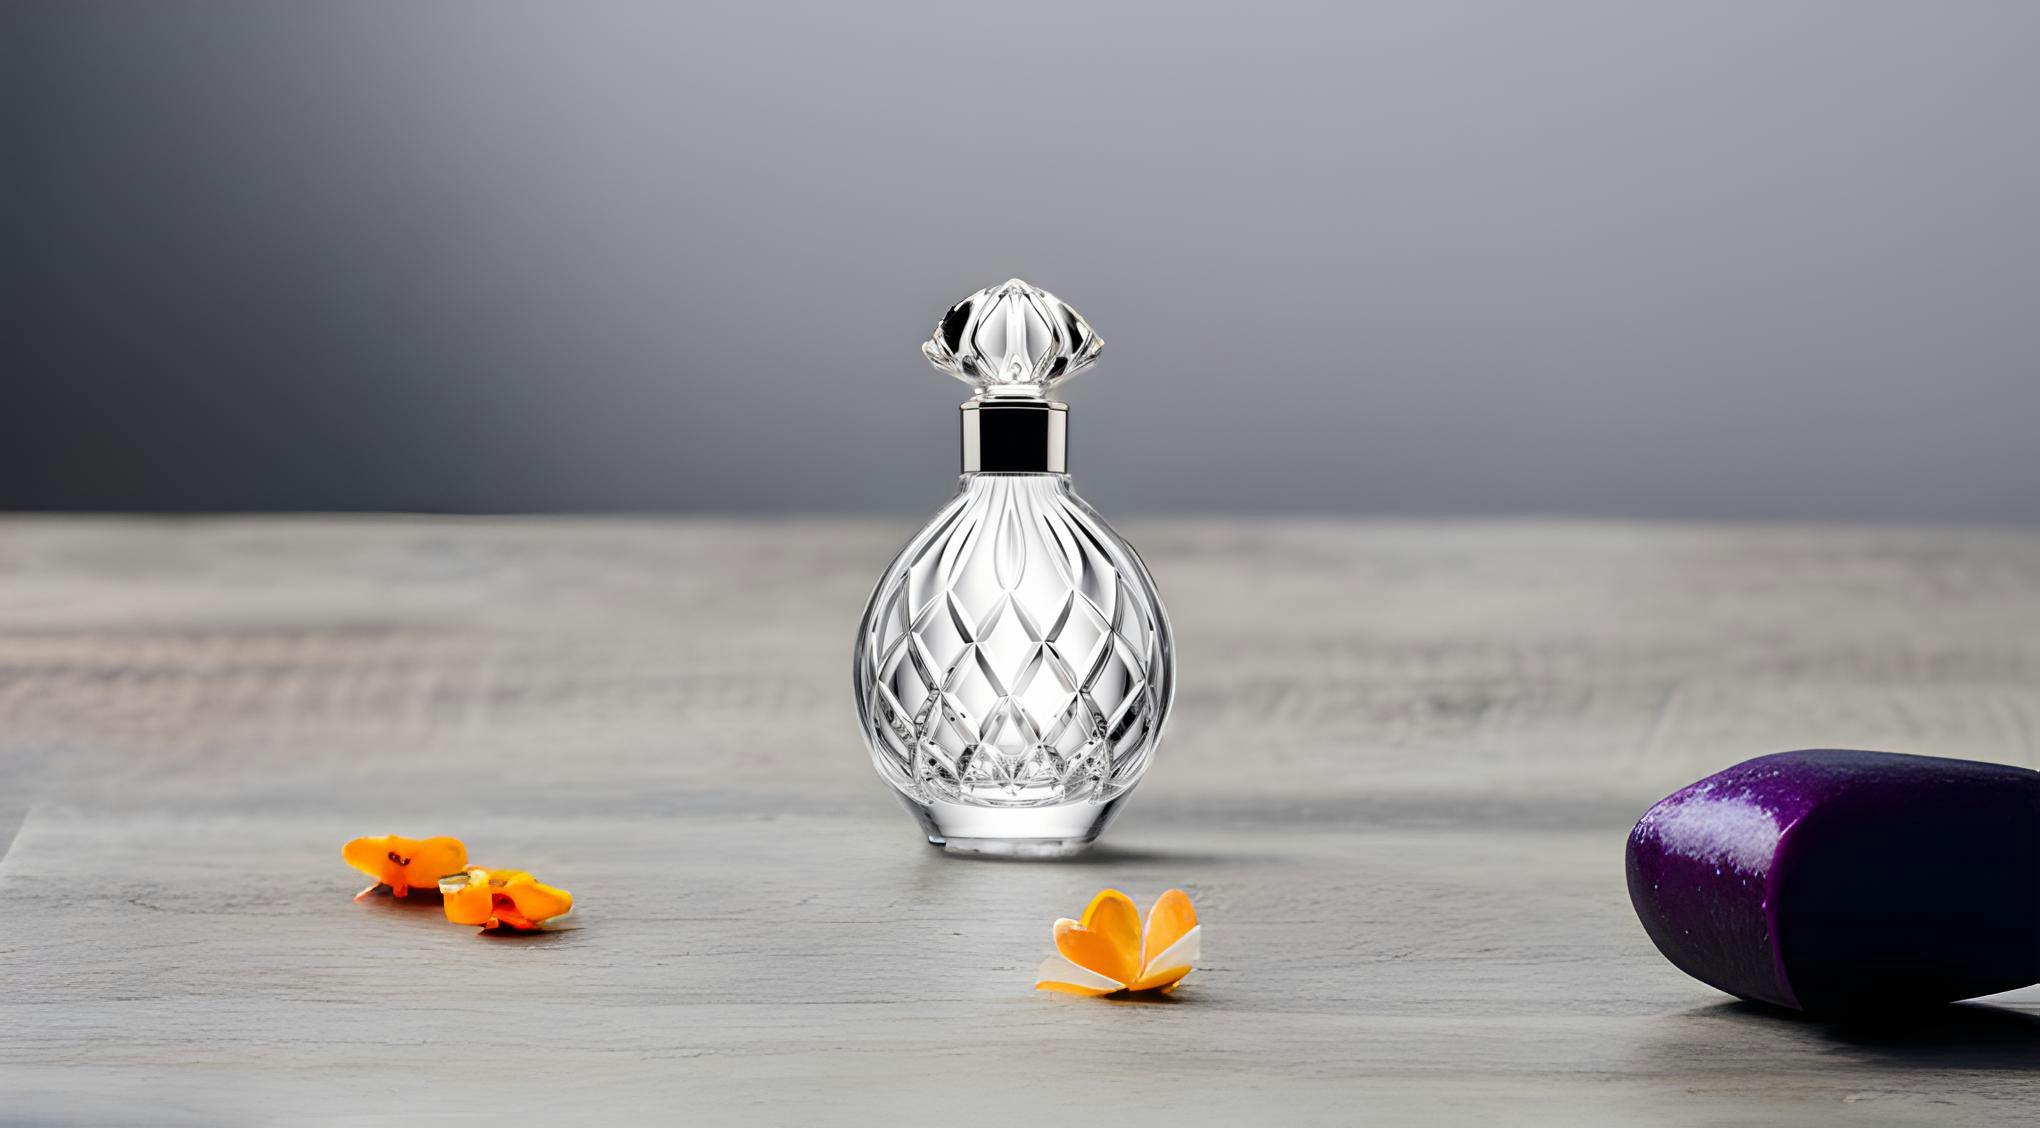 Eye-level product photography of a perfume bottle and flowers. Shot on 120mm with a Hasselblad camera, the high-resolution image.